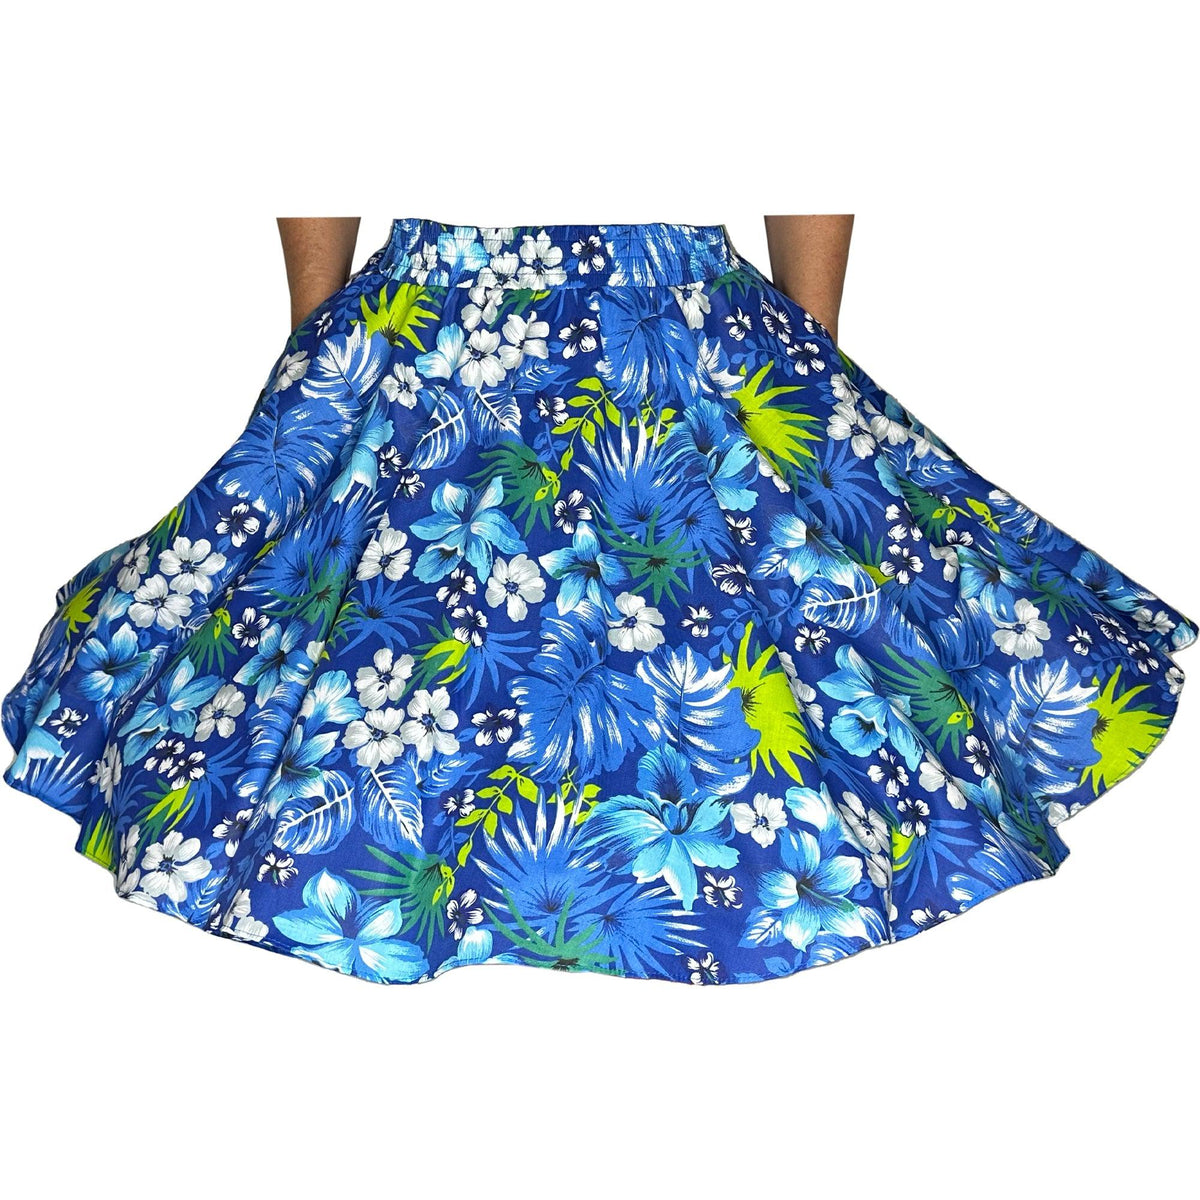 A woman wearing a Tropical Hawaiian Square Dance Skirt from Square Up Fashions with hibiscus flowers and palm leaves.